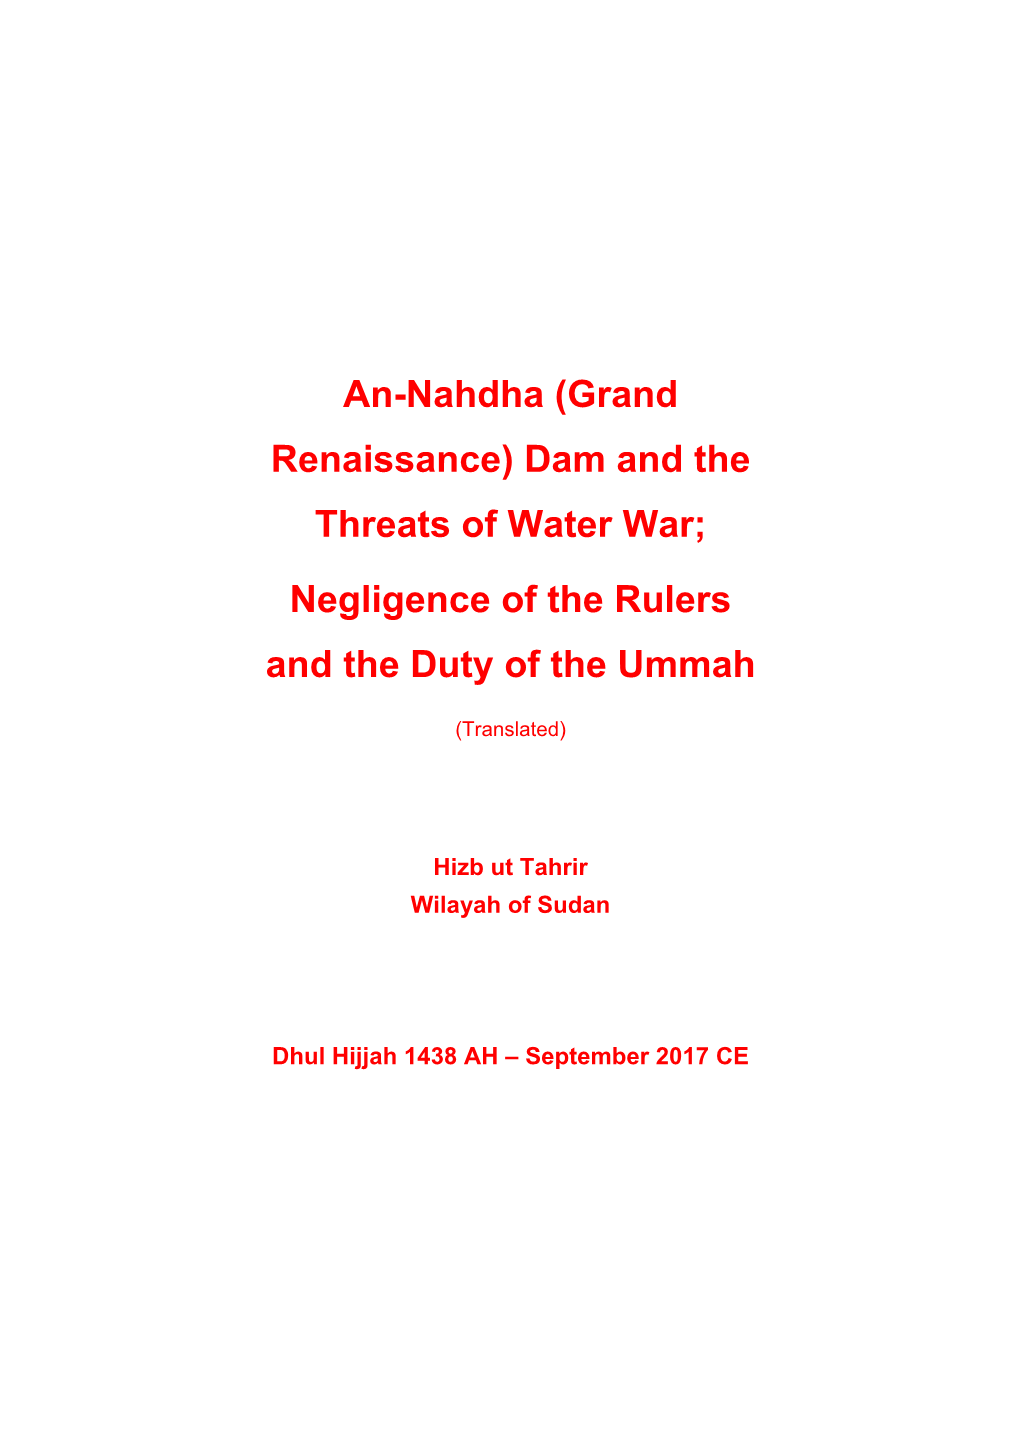 Dam and the Threats of Water War; Negligence of the Rulers and the Duty of the Ummah